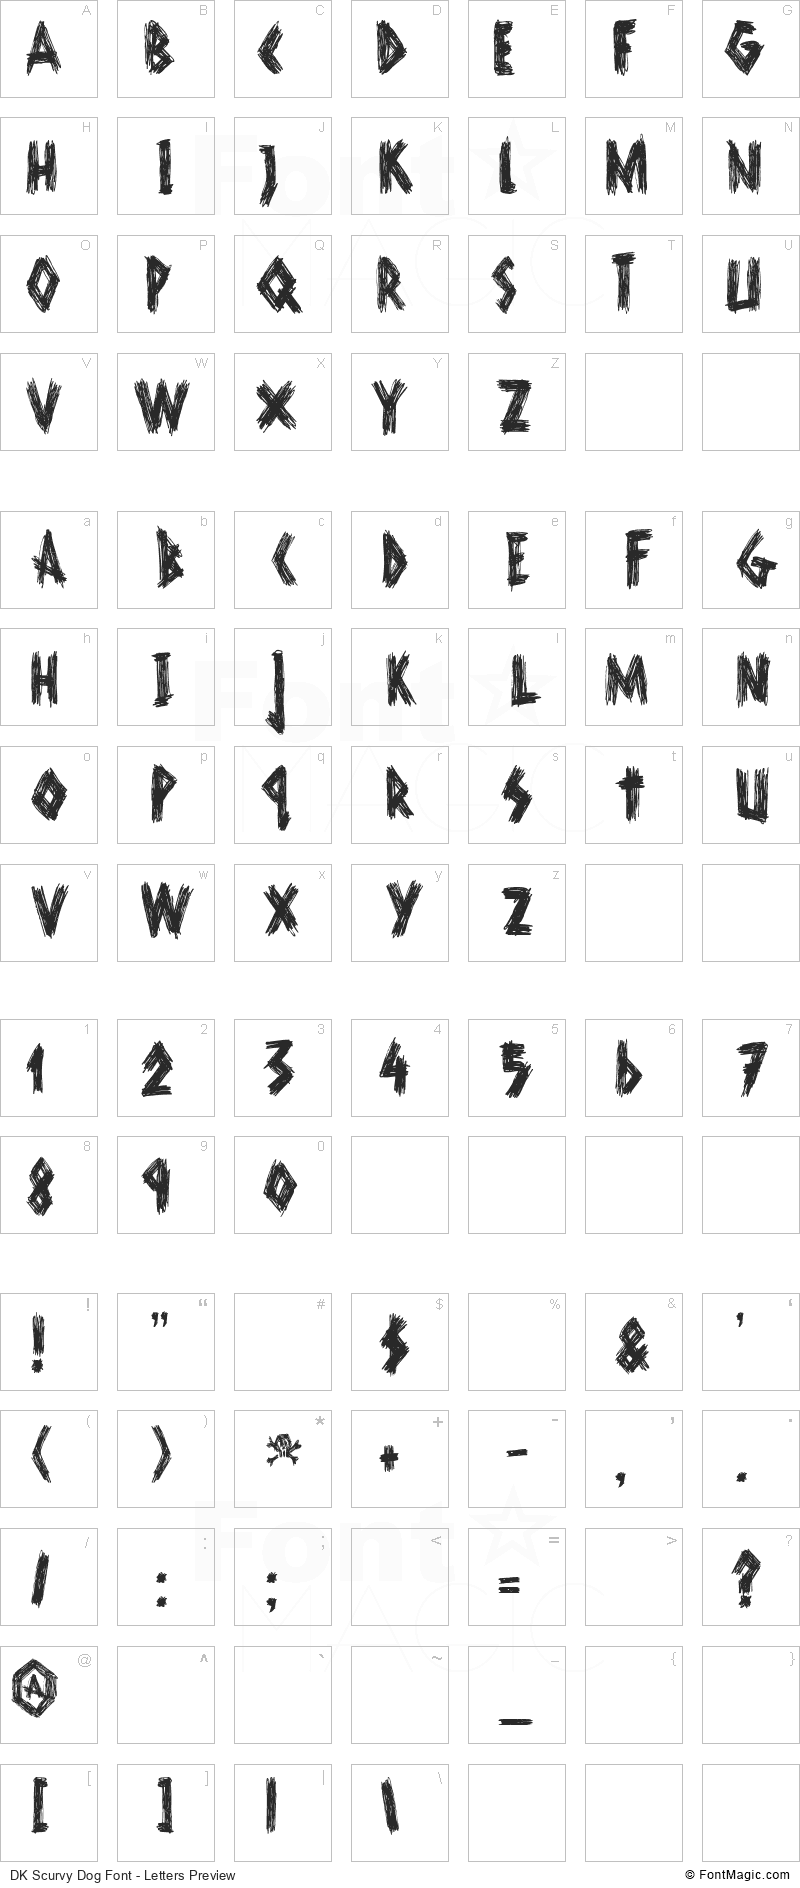 DK Scurvy Dog Font - All Latters Preview Chart